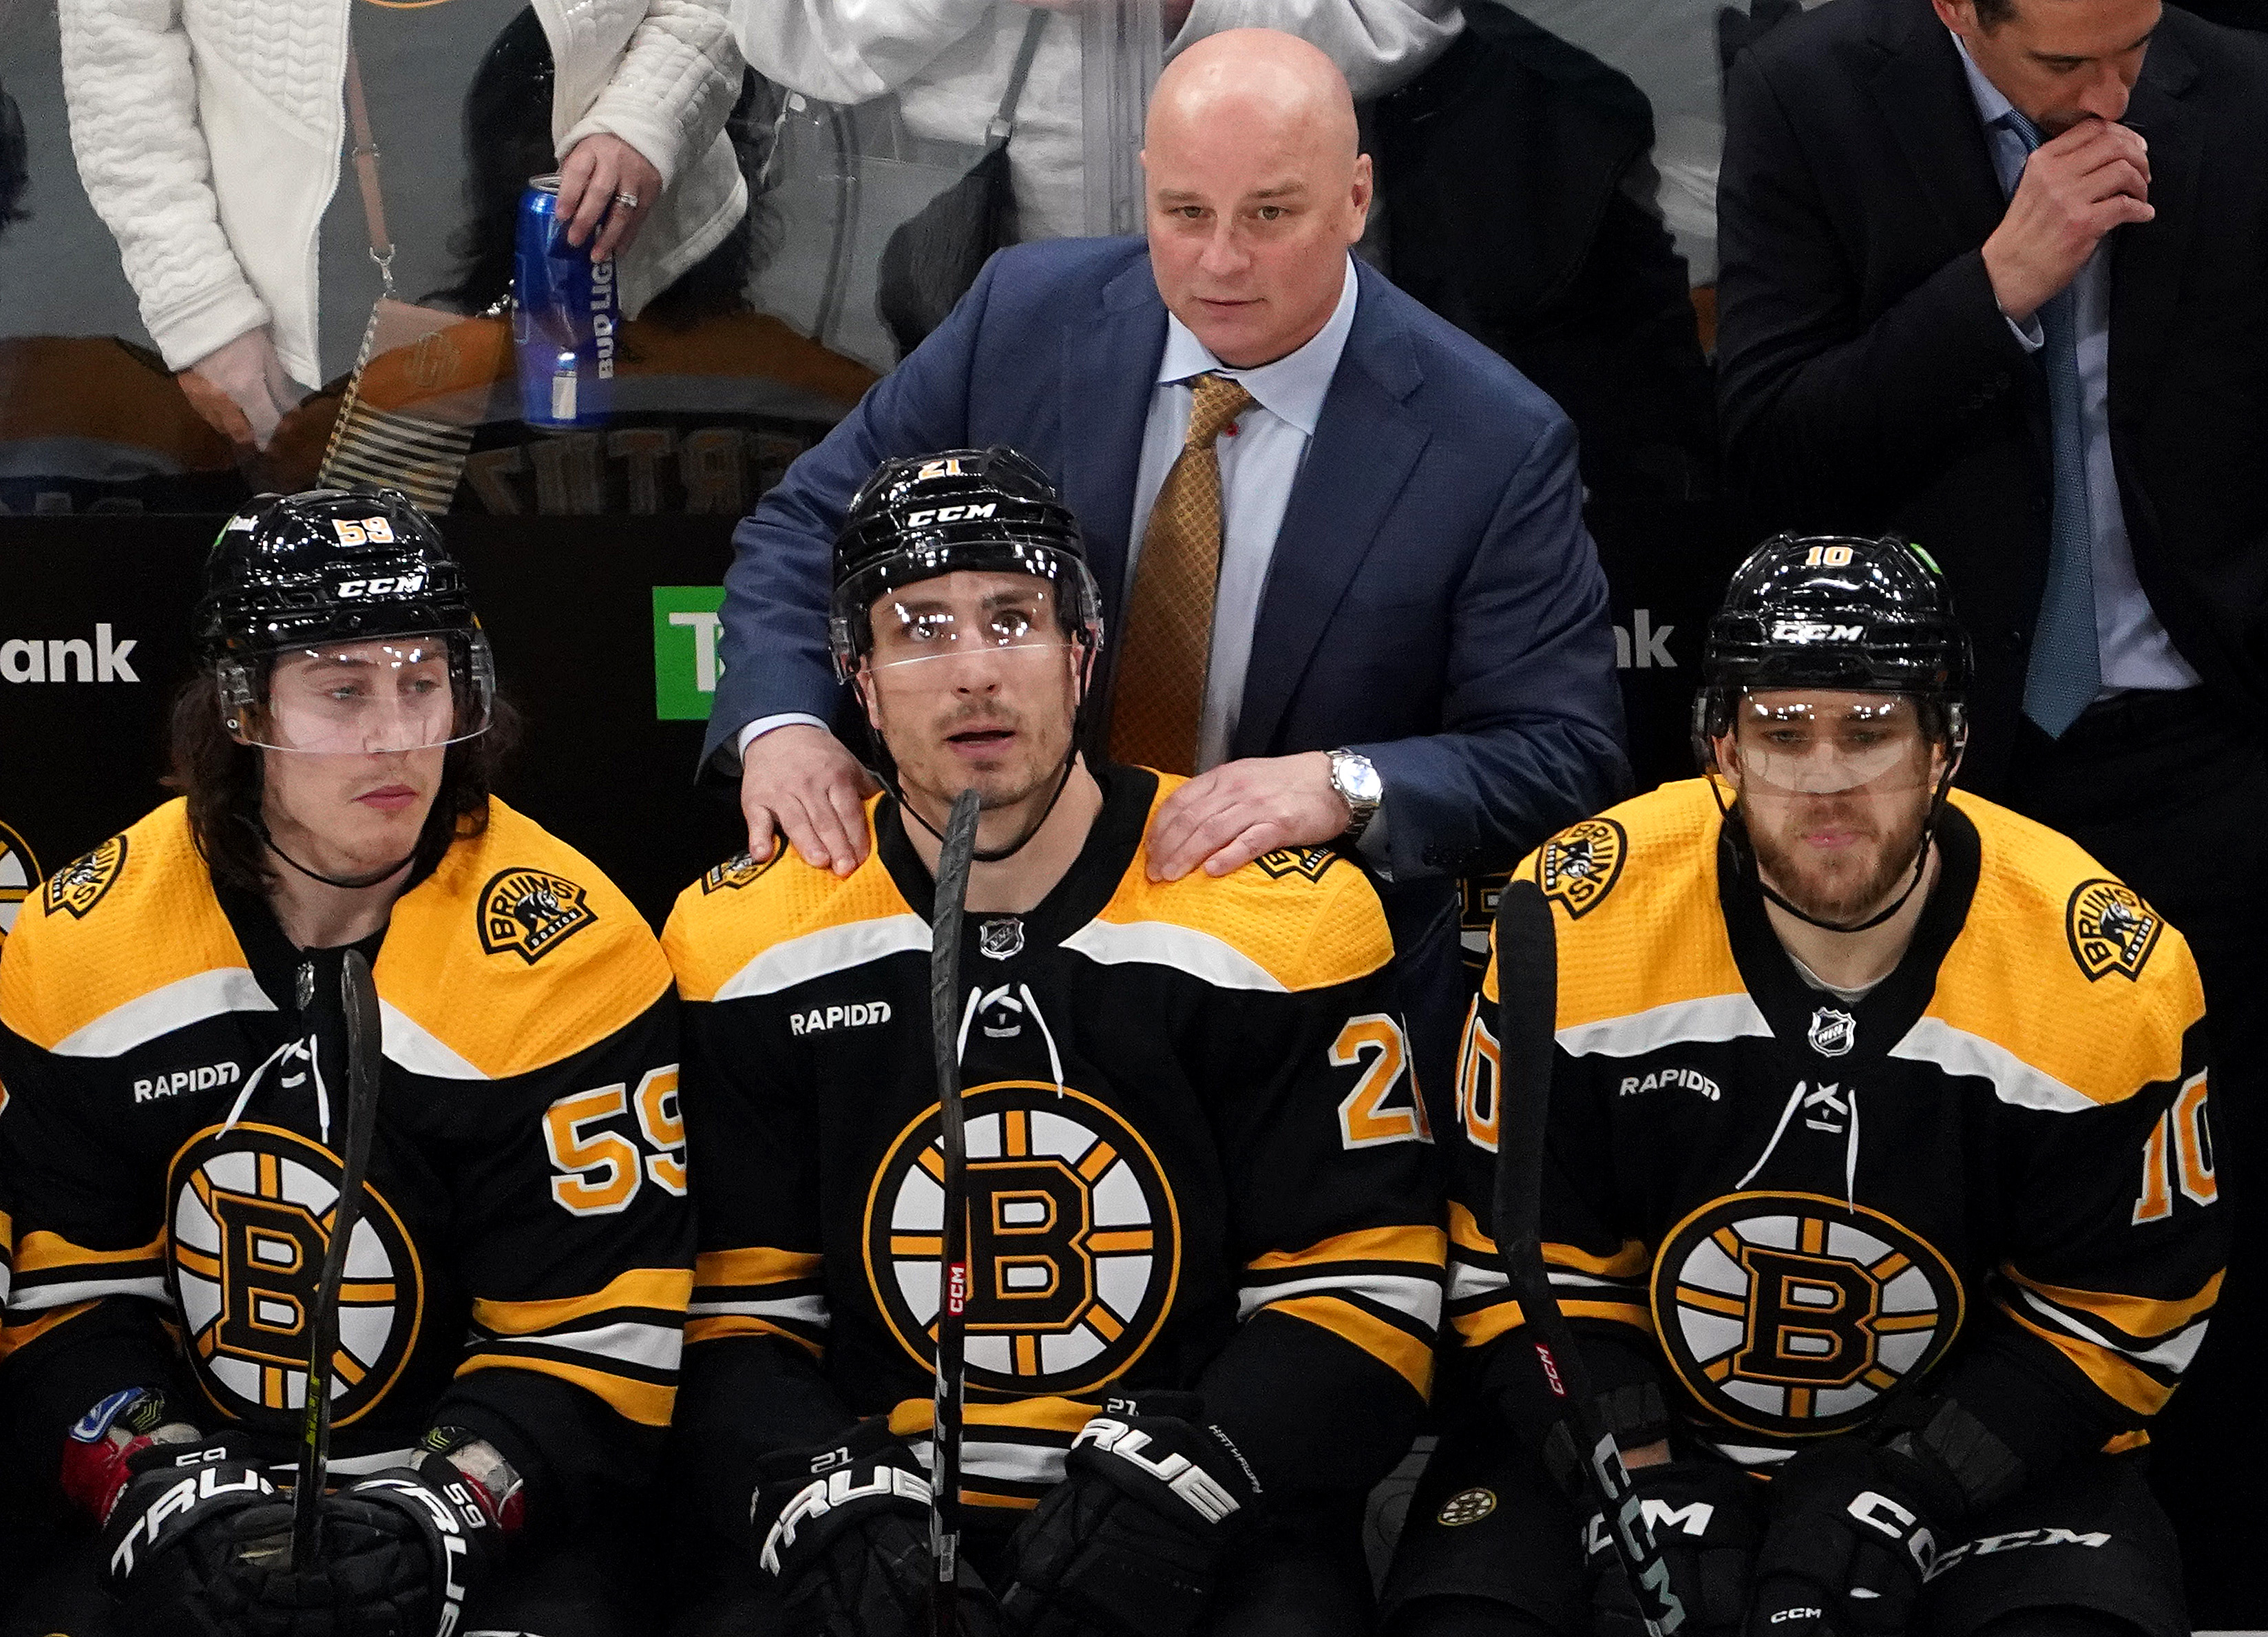 NHL playoff schedule Bruins-Panthers opens Monday; see the schedule